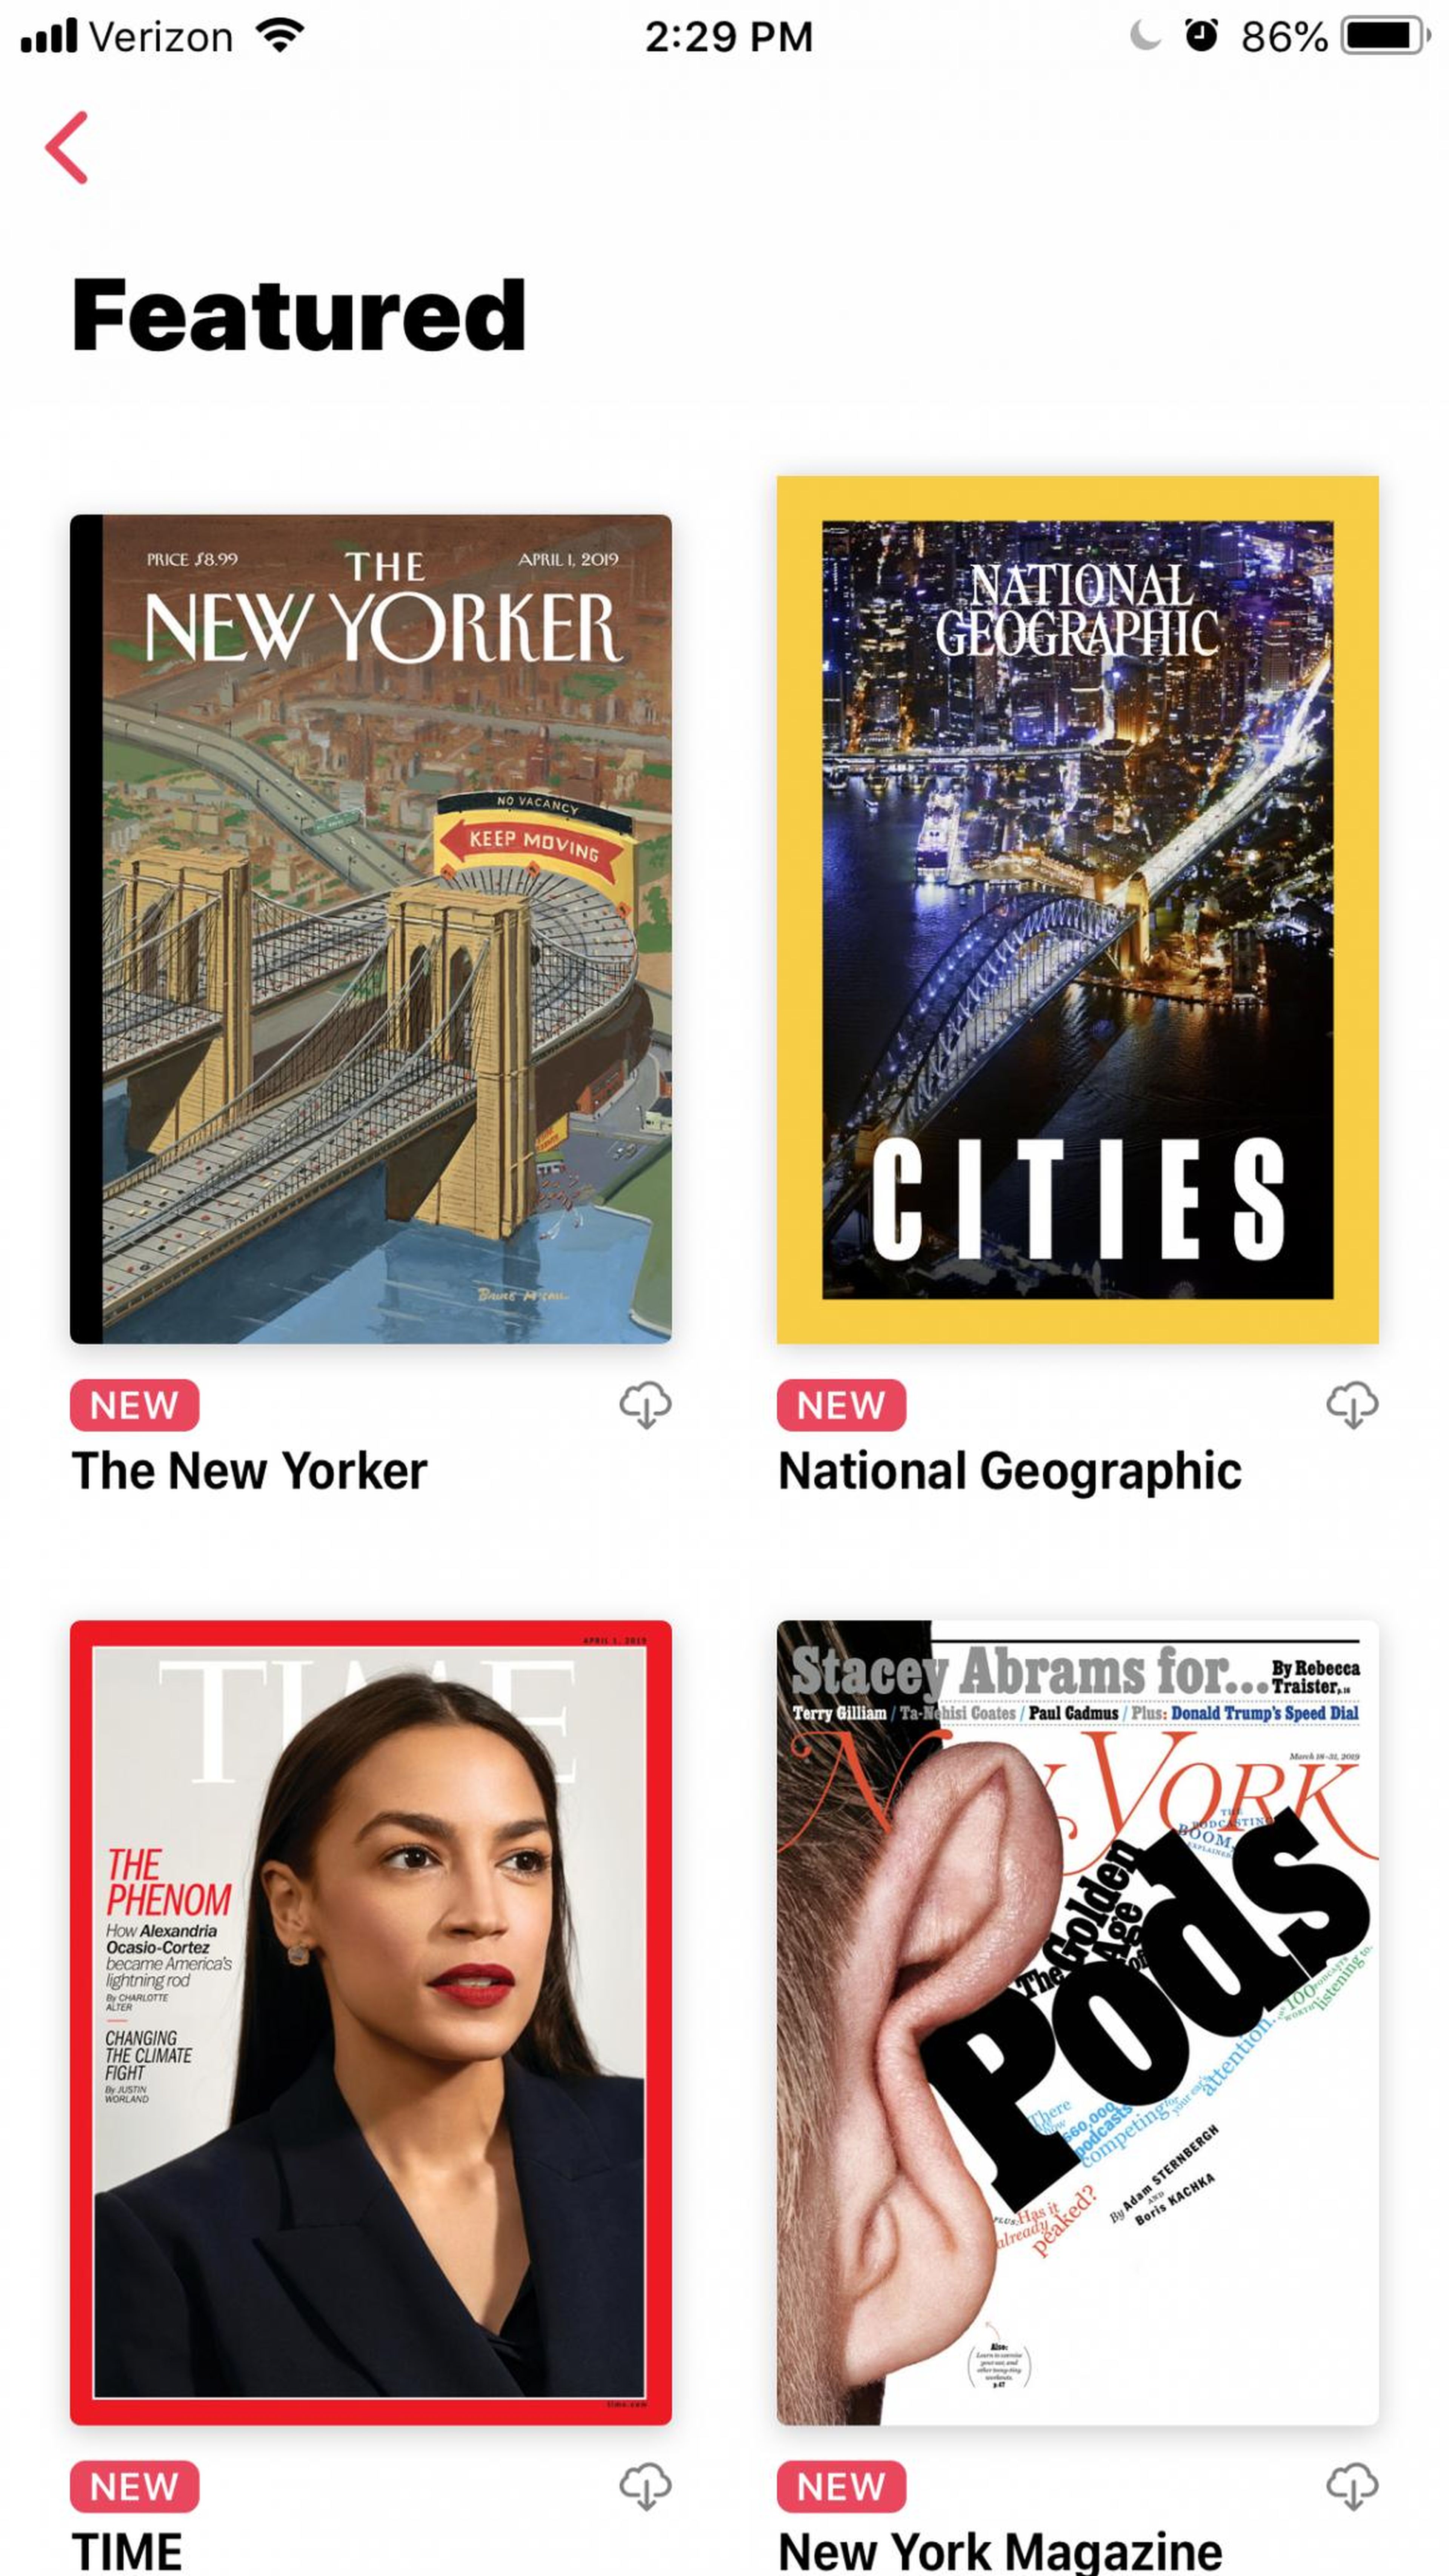 Alternatively, you can browse magazines in particular categories, including "business and finance" and "featured."